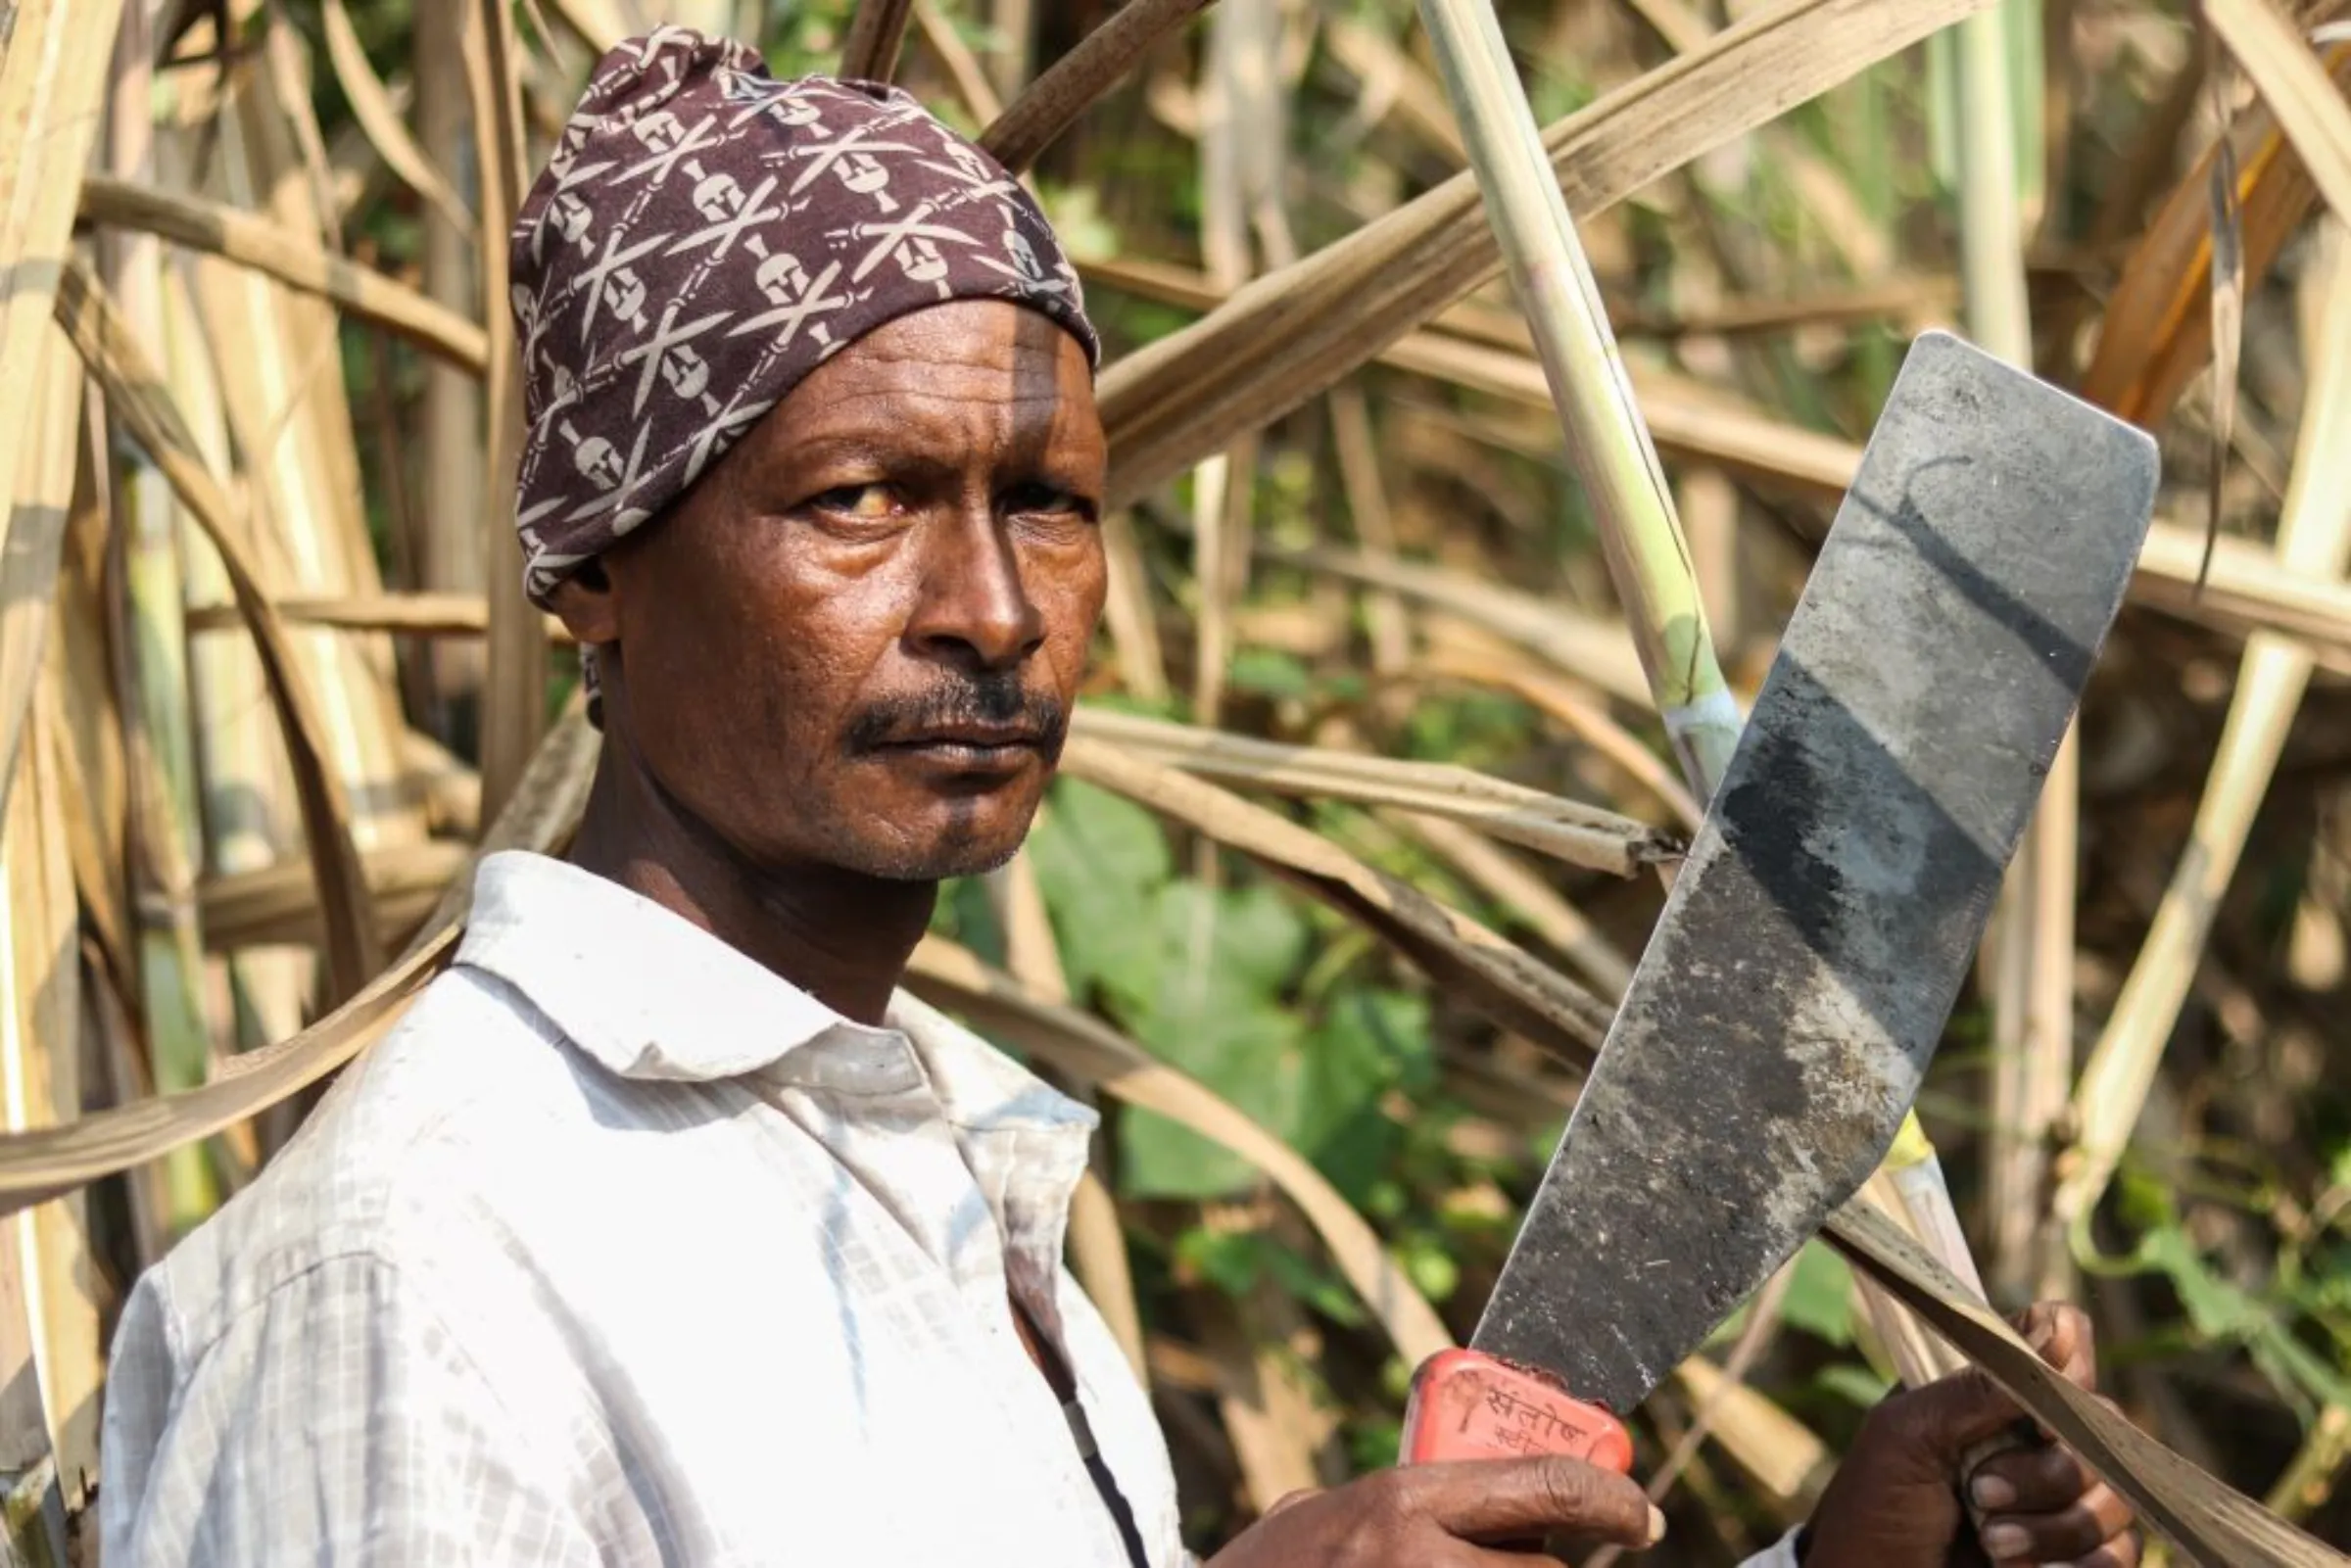 Dharma Bhil holds a sickle in a sugarcane field in Maharashtra’s Khochi village, India. December 17, 2022